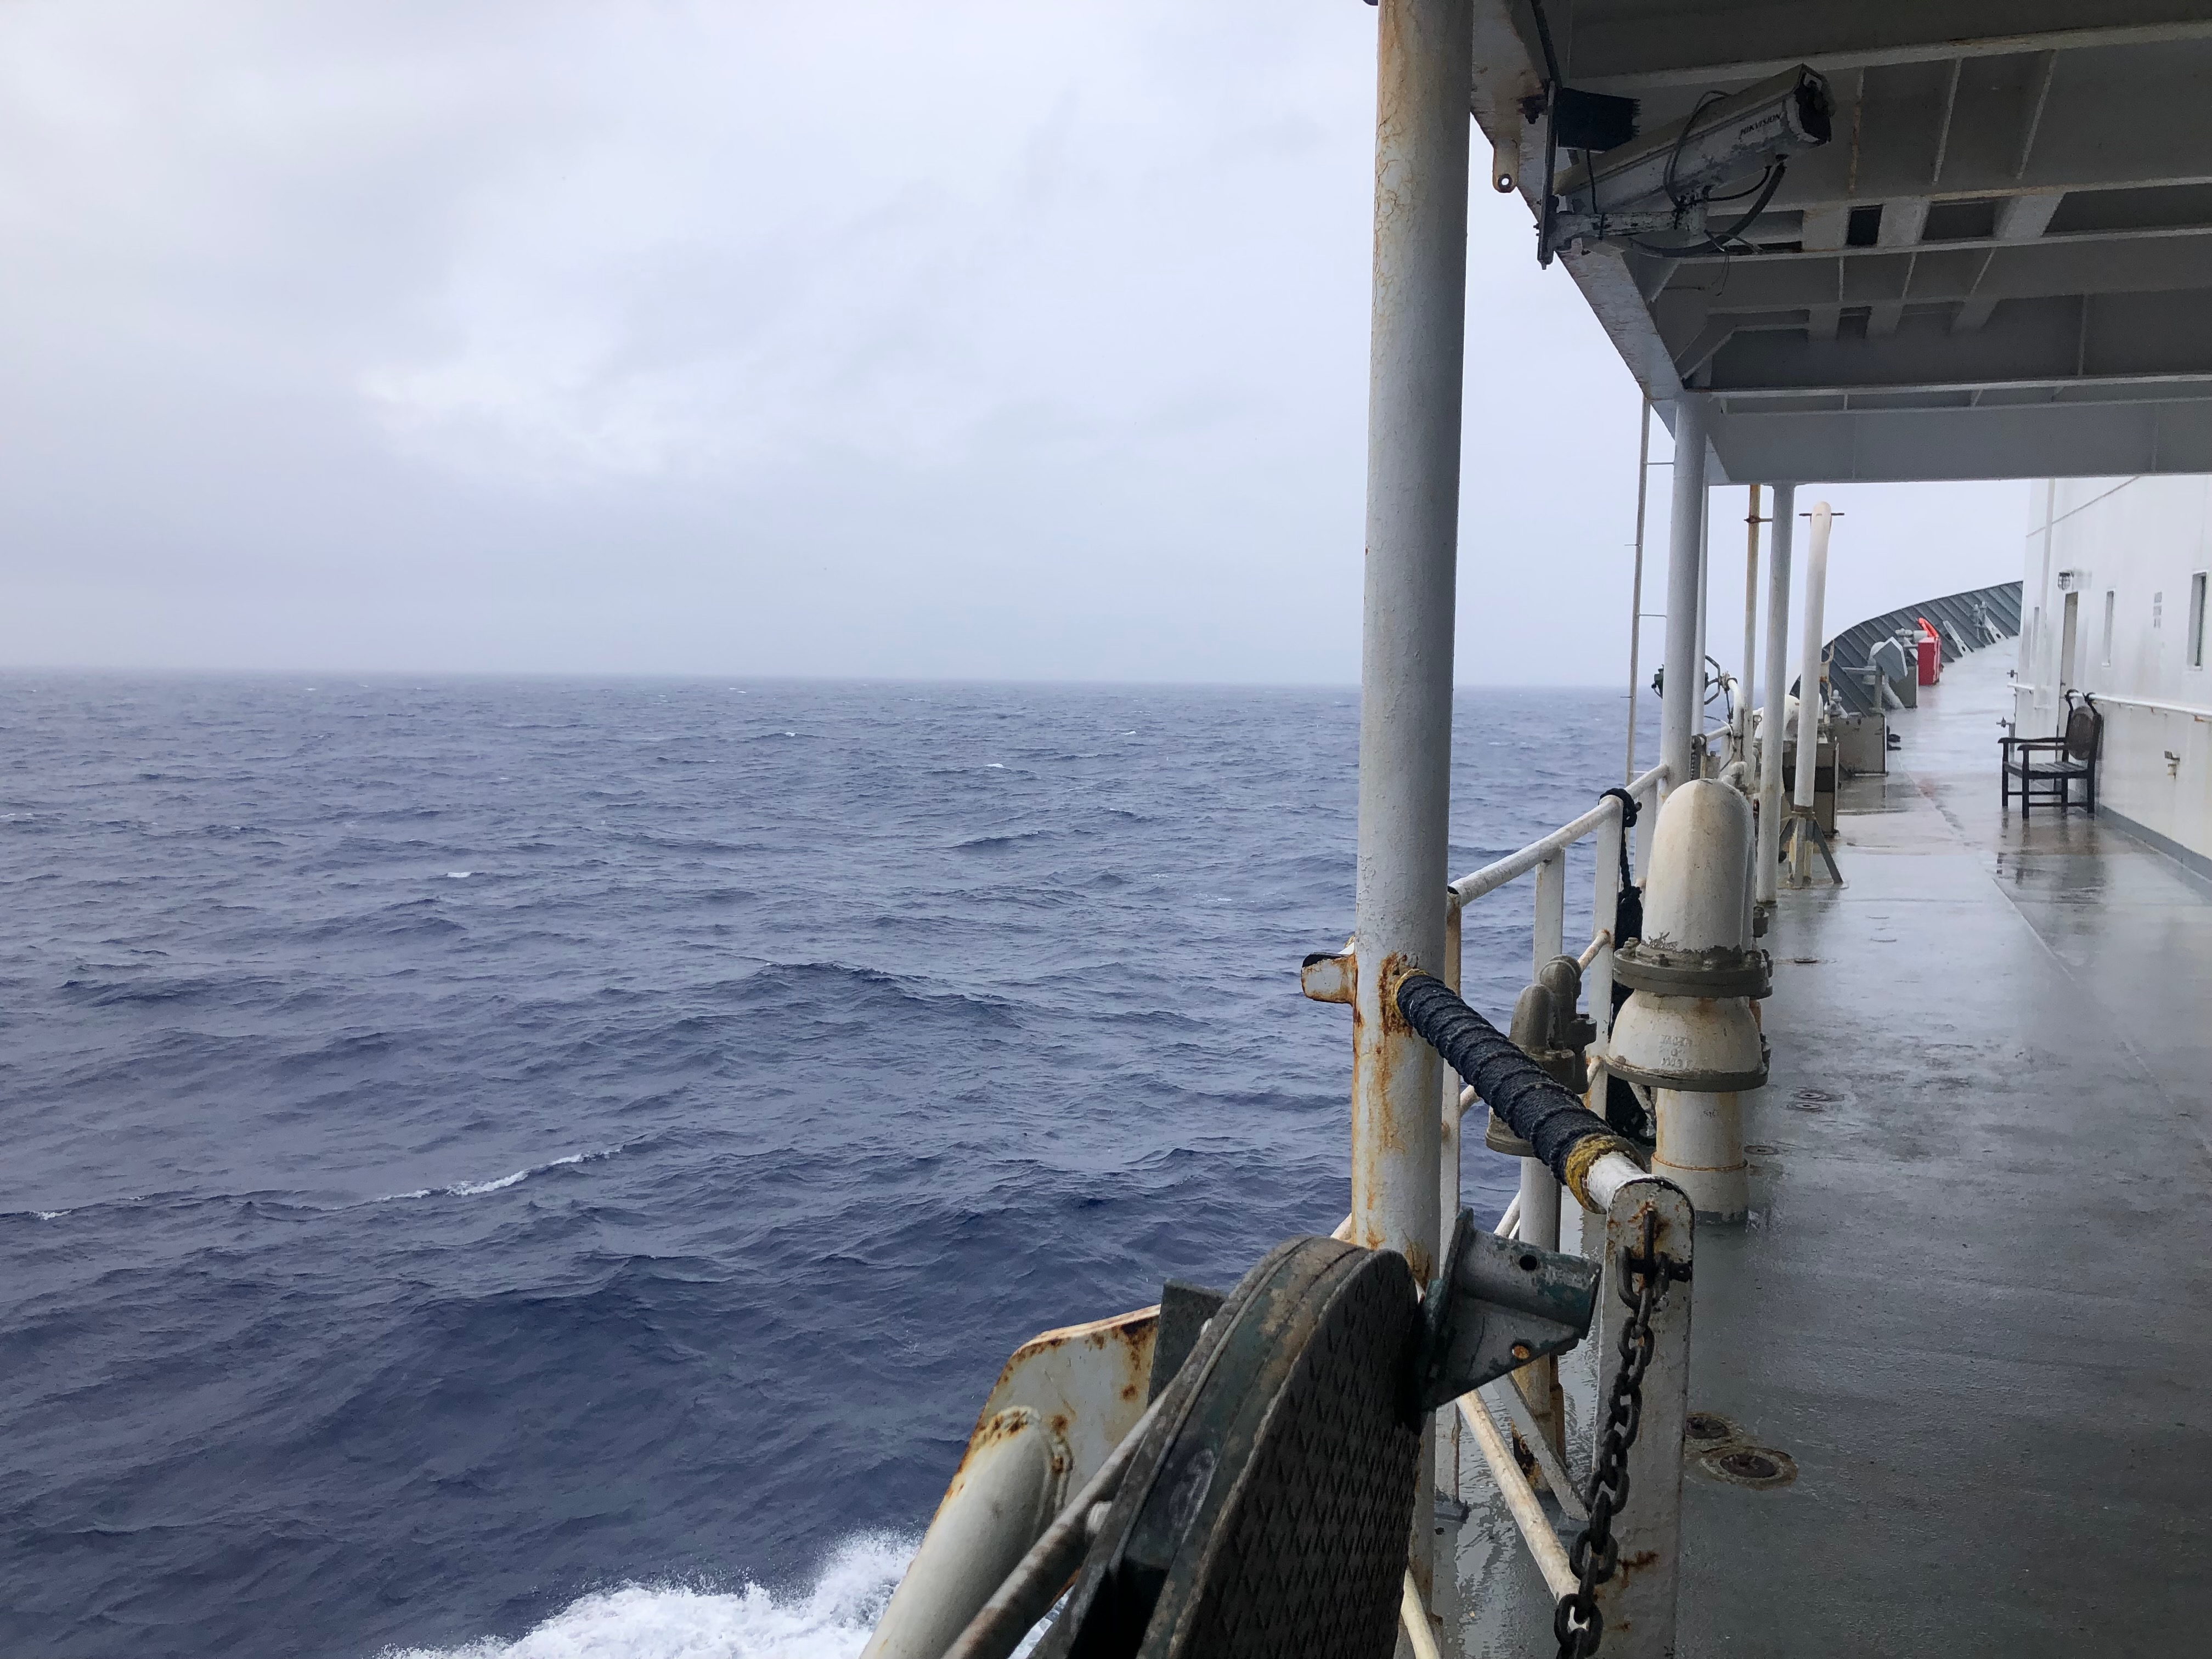 View of  Pacific Northwest waters under the “marine layer” from the port side Quarter deck